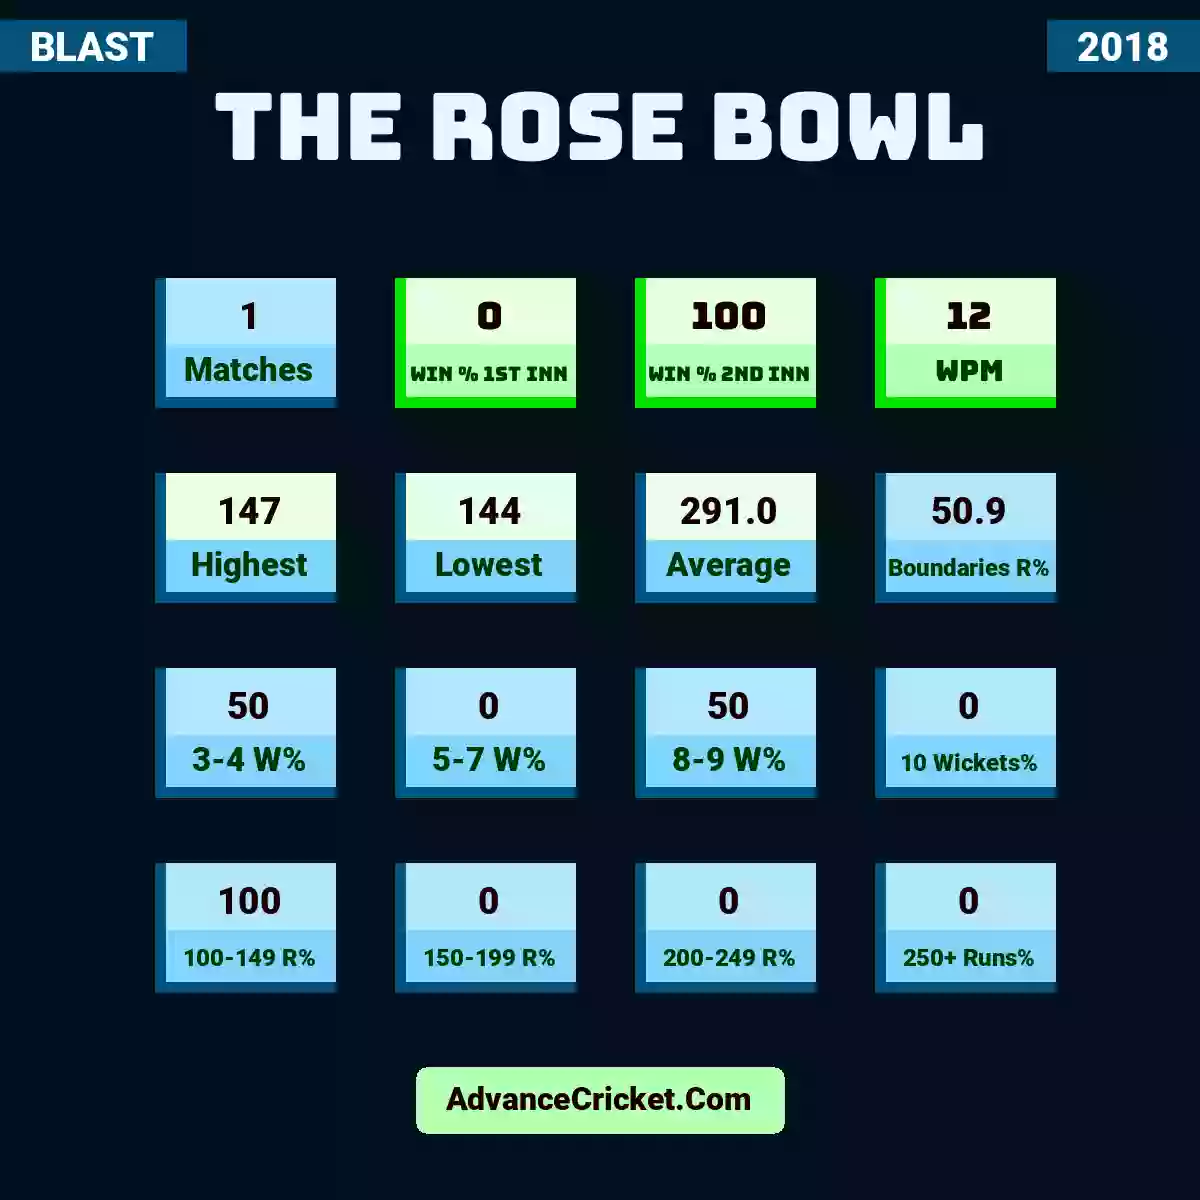 Image showing The Rose Bowl with Matches: 1, Win % 1st Inn: 0, Win % 2nd Inn: 100, WPM: 12, Highest: 147, Lowest: 144, Average: 291.0, Boundaries R%: 50.9, 3-4 W%: 50, 5-7 W%: 0, 8-9 W%: 50, 10 Wickets%: 0, 100-149 R%: 100, 150-199 R%: 0, 200-249 R%: 0, 250+ Runs%: 0.